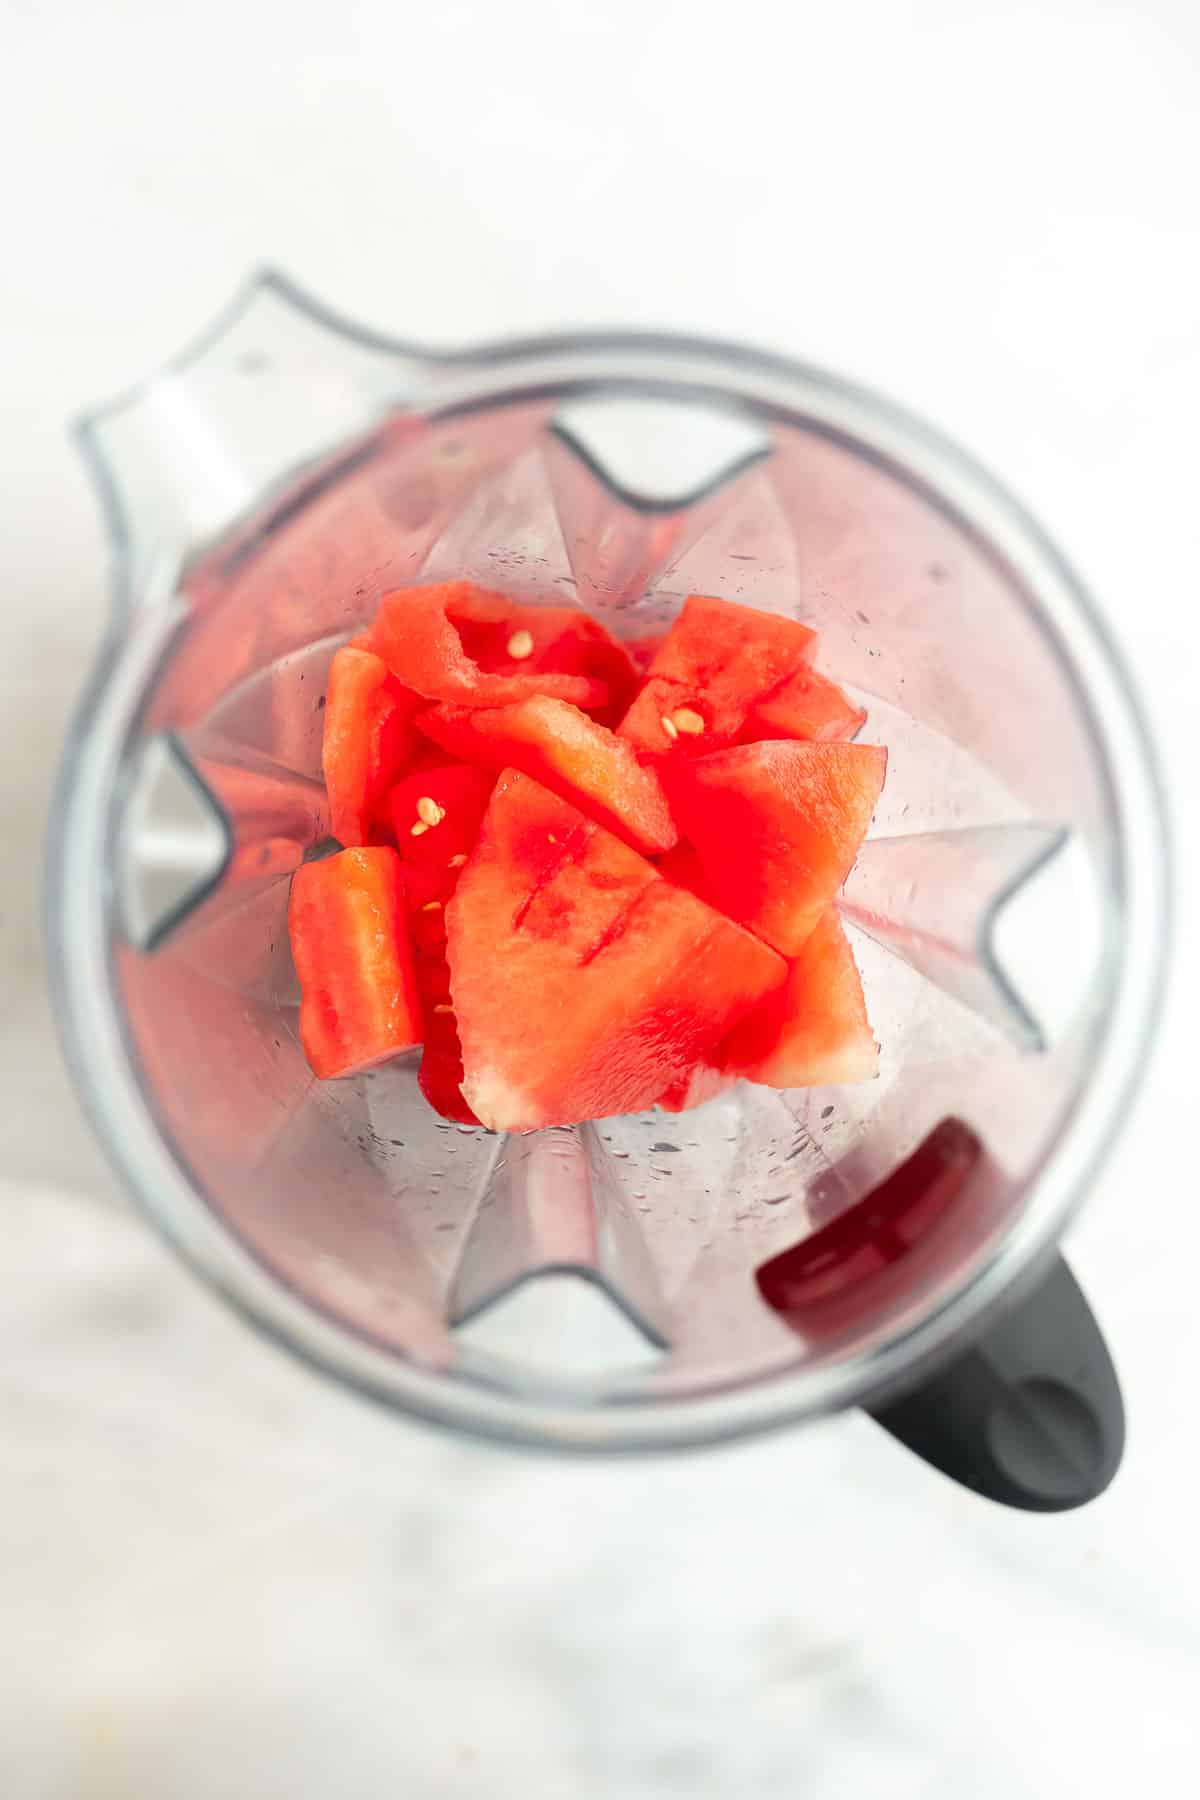 cubed watermelon in a blender